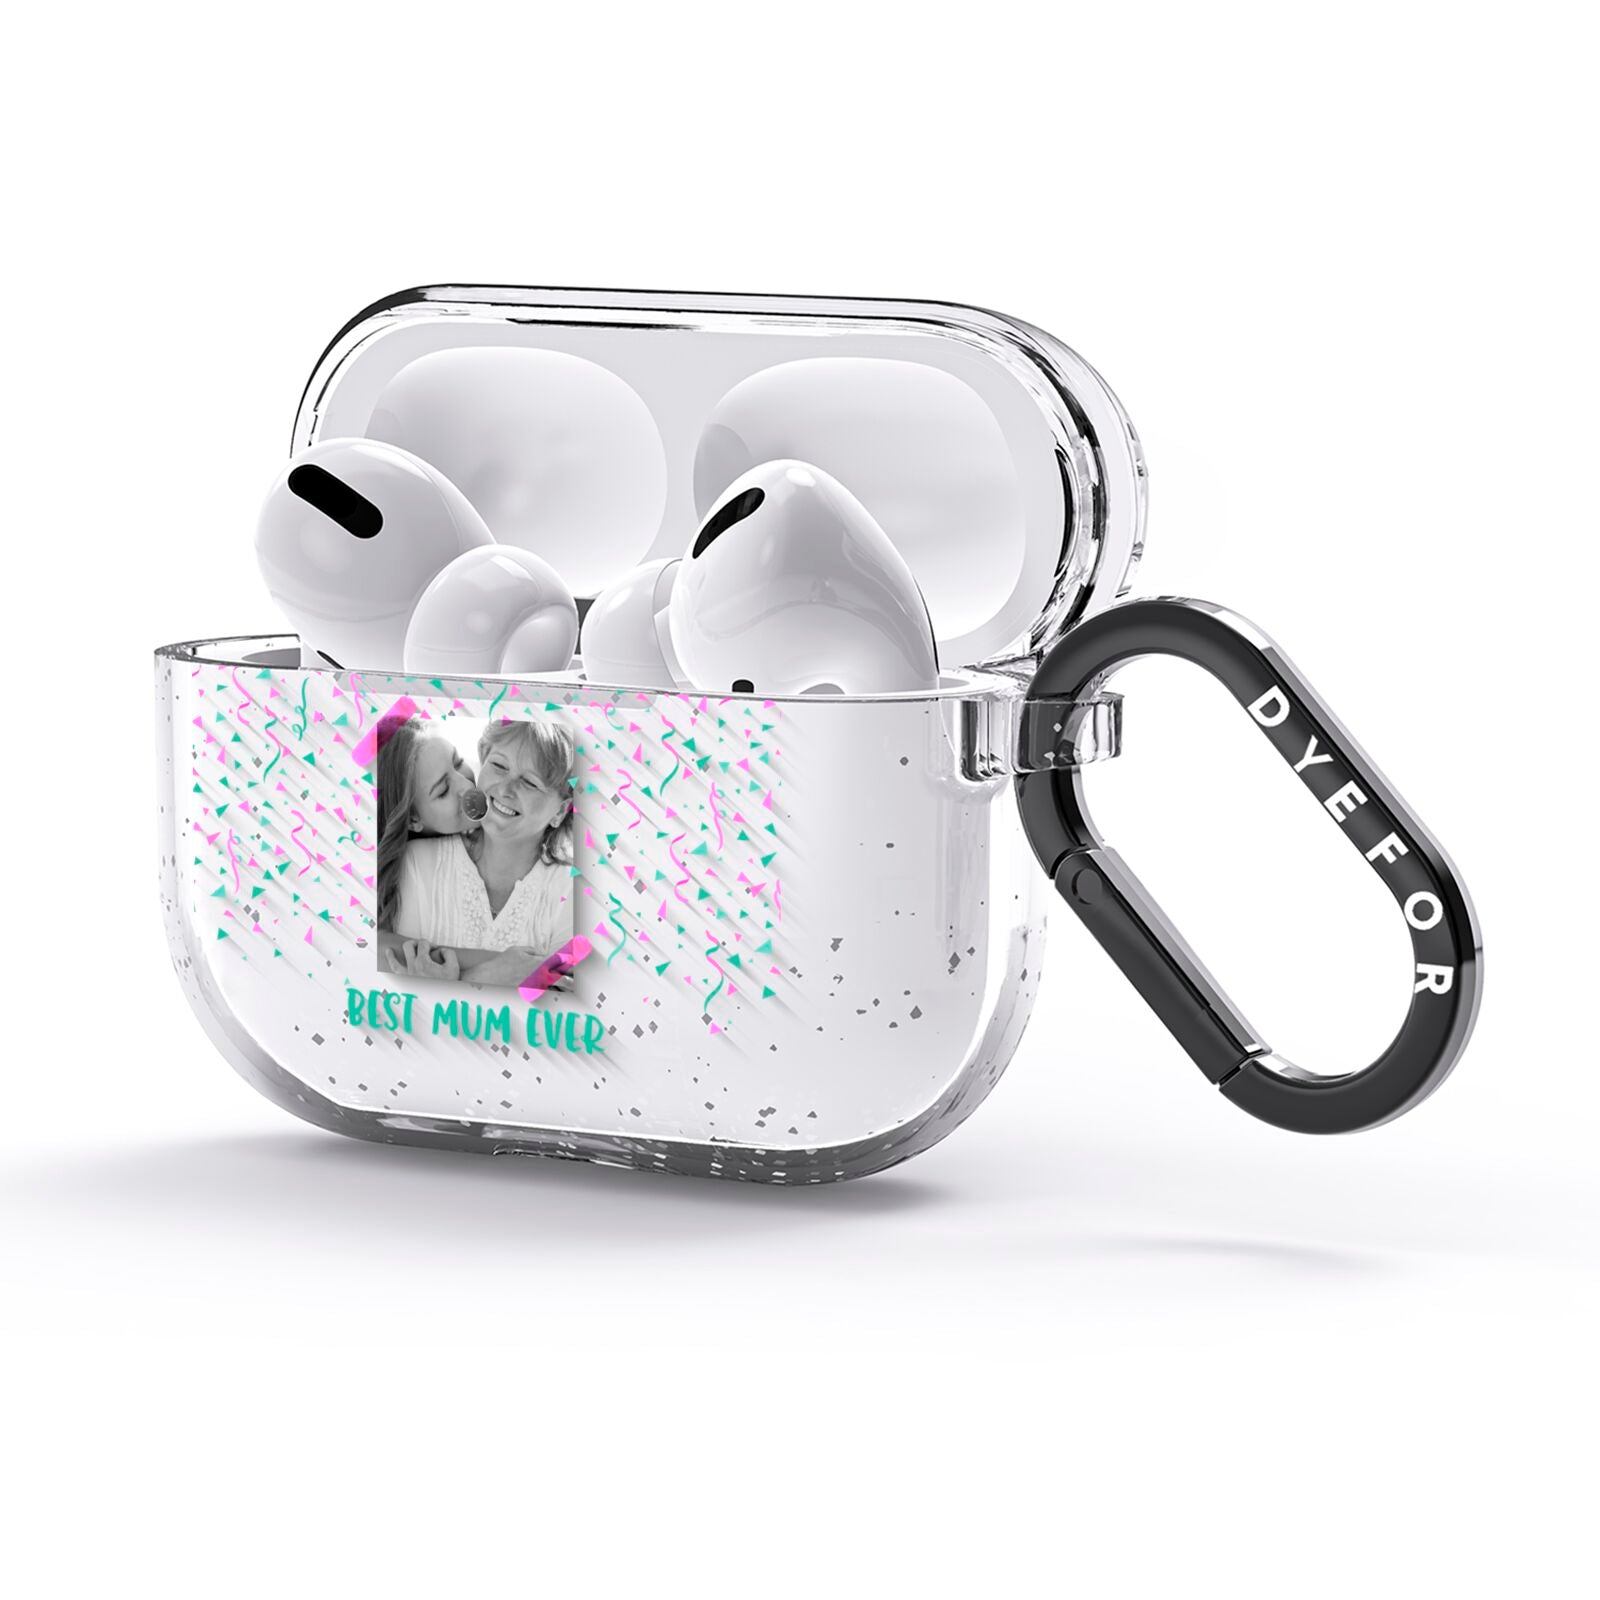 Best Mum Photo Upload Mothers Day AirPods Glitter Case 3rd Gen Side Image